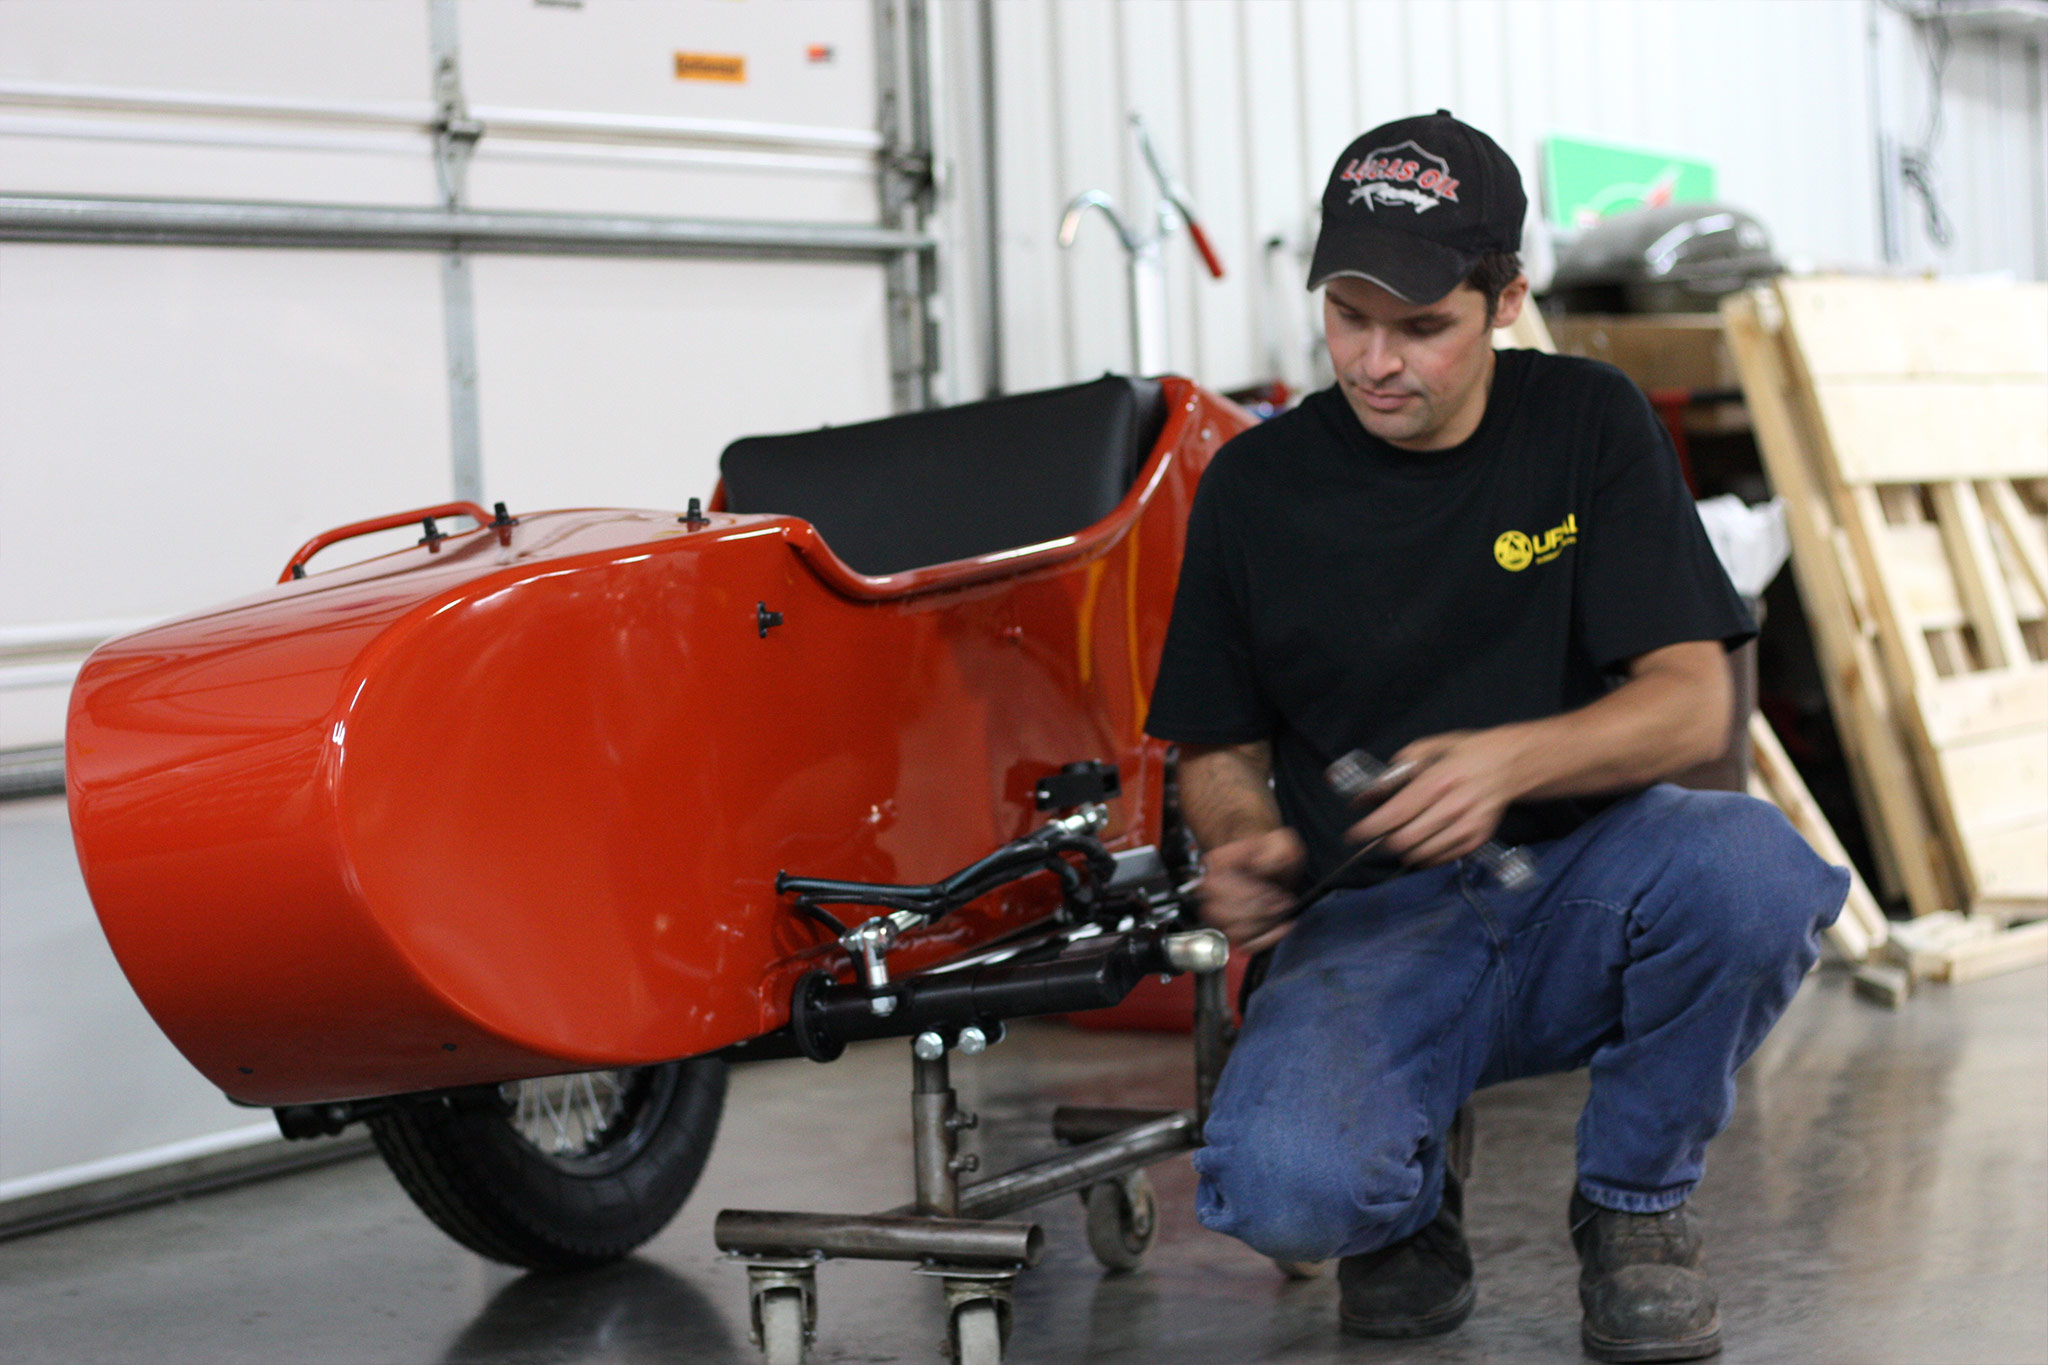 Jon prepping the sidecar for installation.